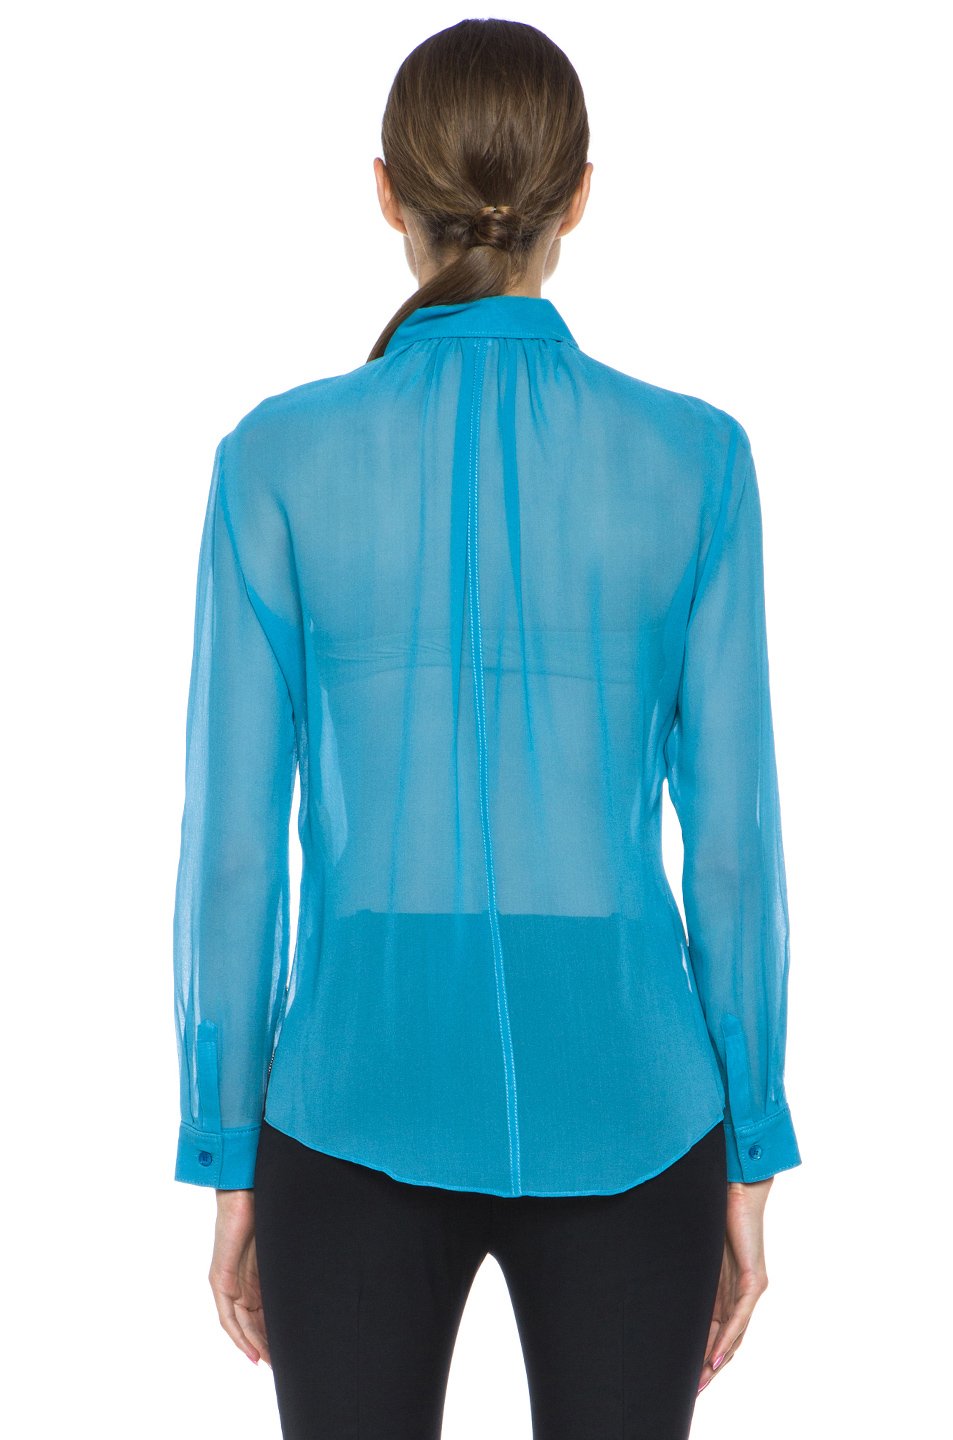 ACNE Teal Blue Adeline Silk Blouse, SIZE 36 - secondfirst